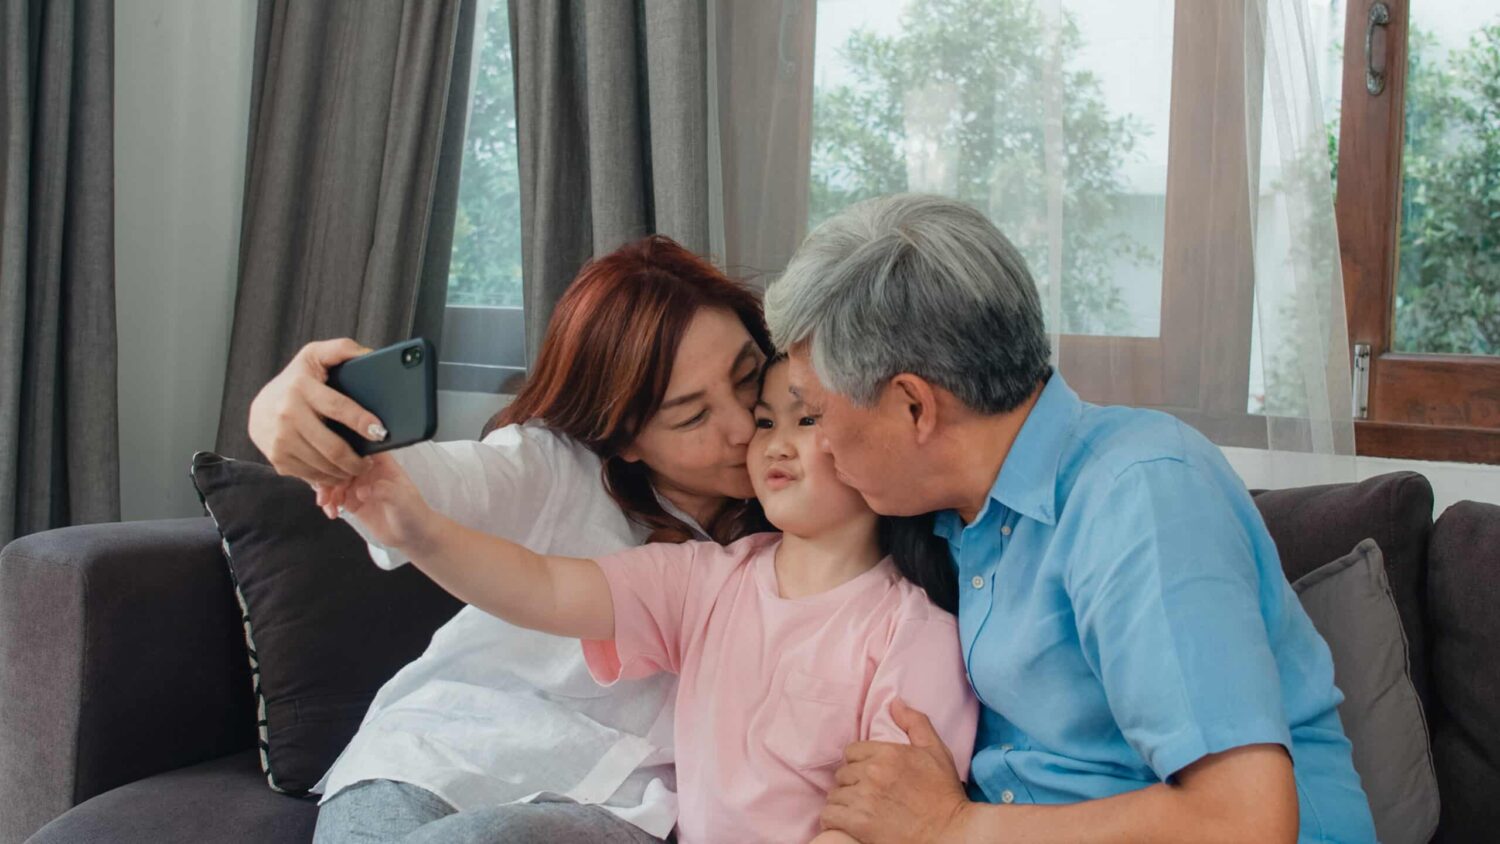 Athene Performance Elite 7 Review - Asian Grandparents Taking Selfie with Grandaughter